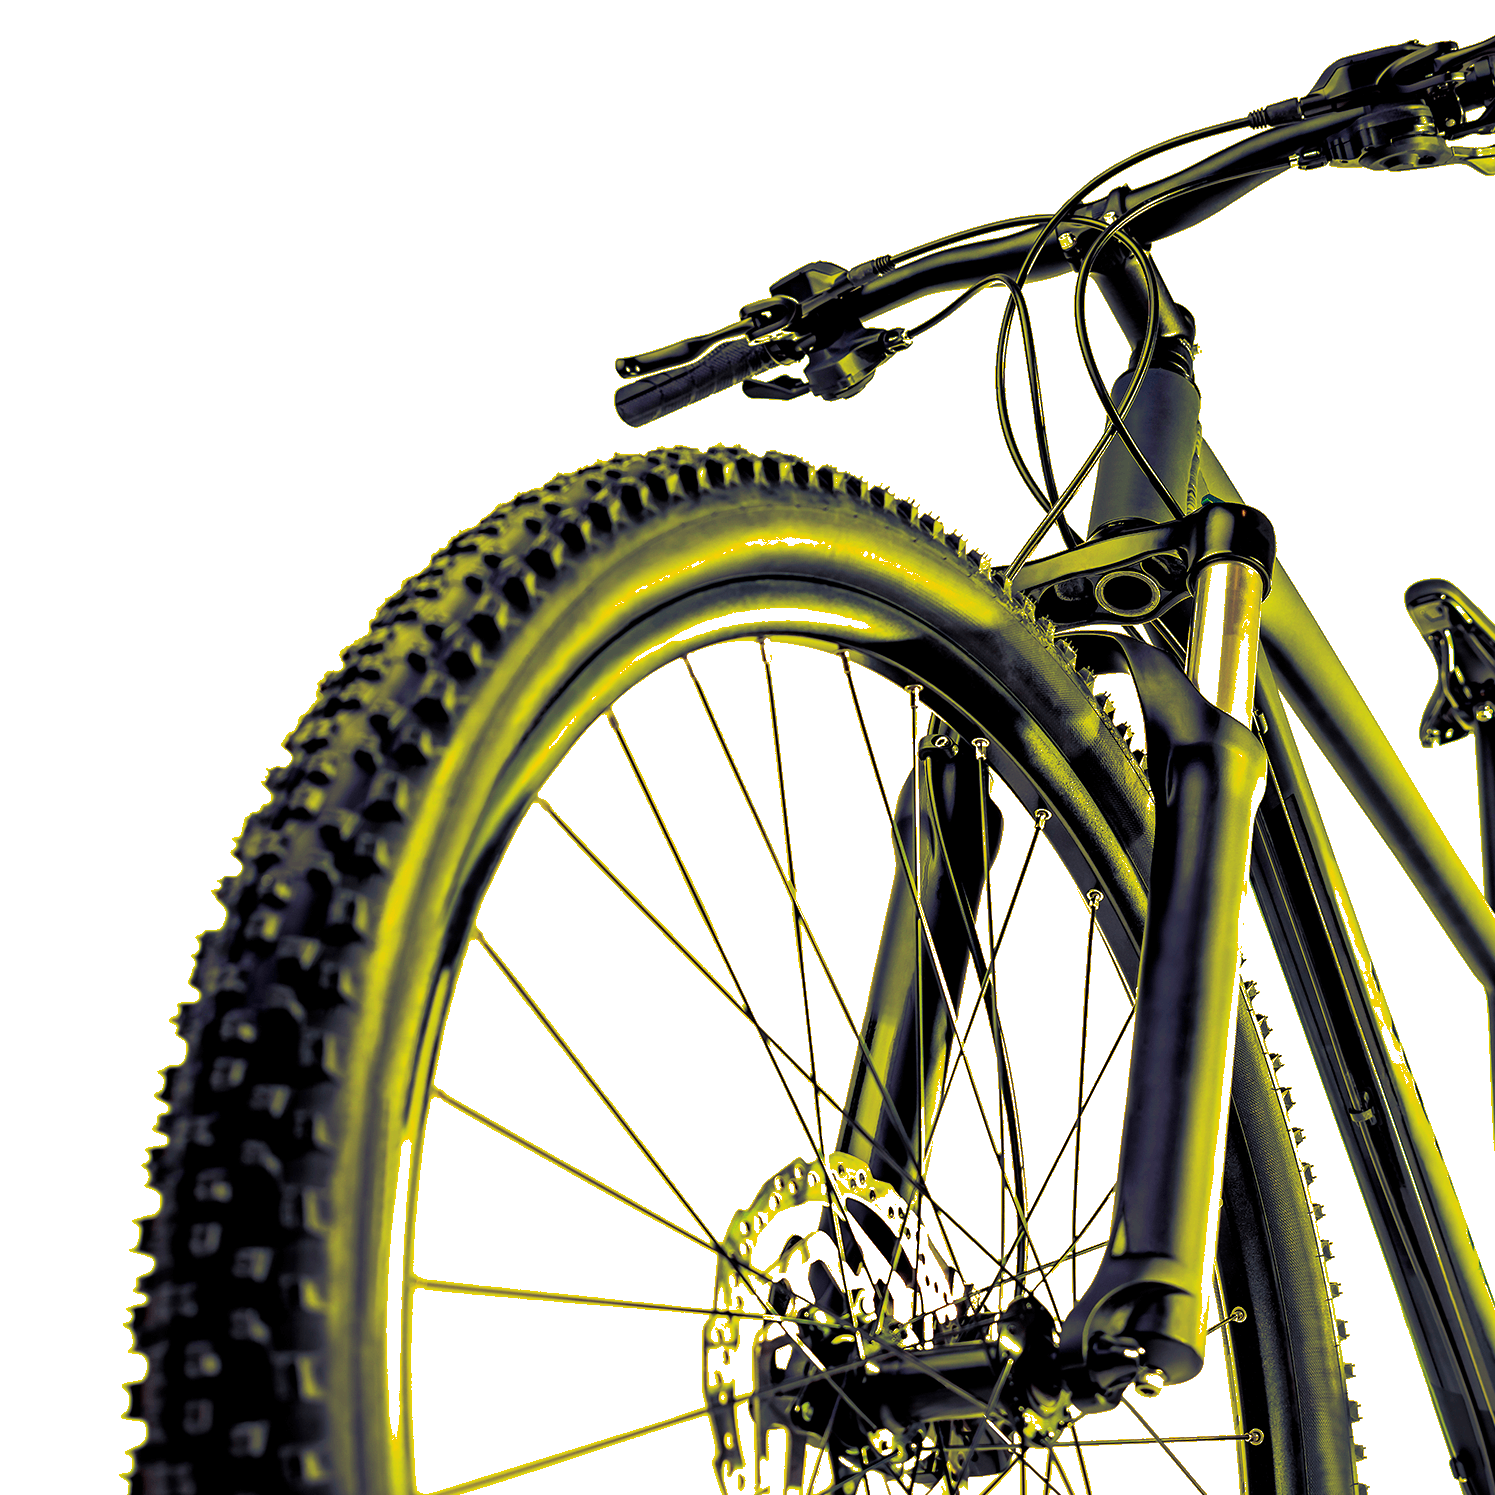 In the picture, the wheel, handlebar and frame of a mountain bike can be appreciated. Is black and it has the suspension to participate in this discipline.